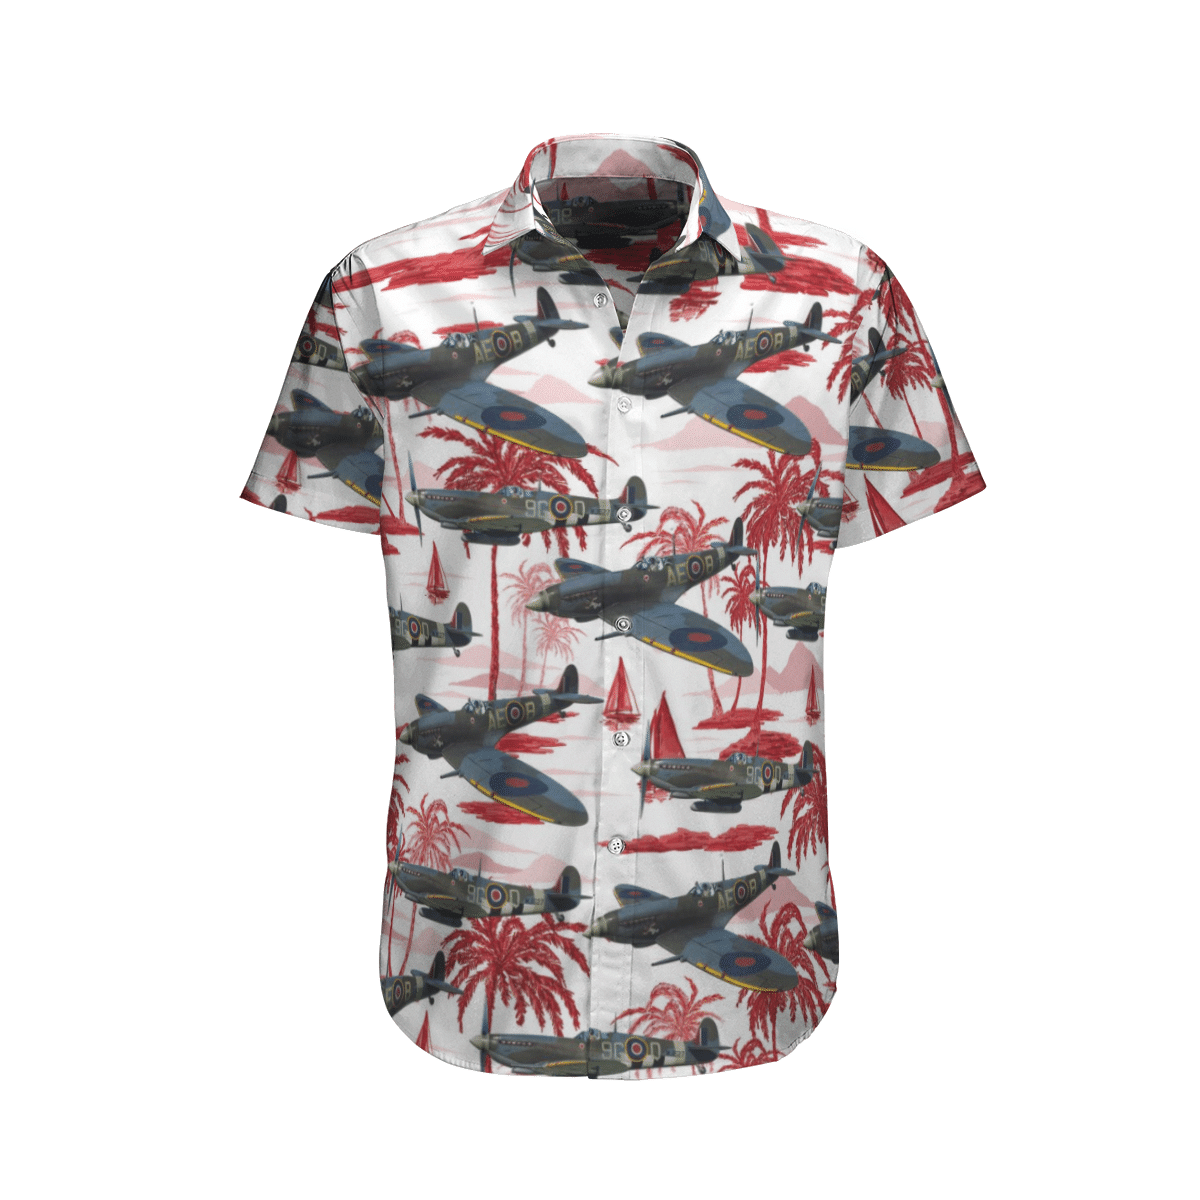 Check out some of the best 3d hawaiian shirt on the market today! 90